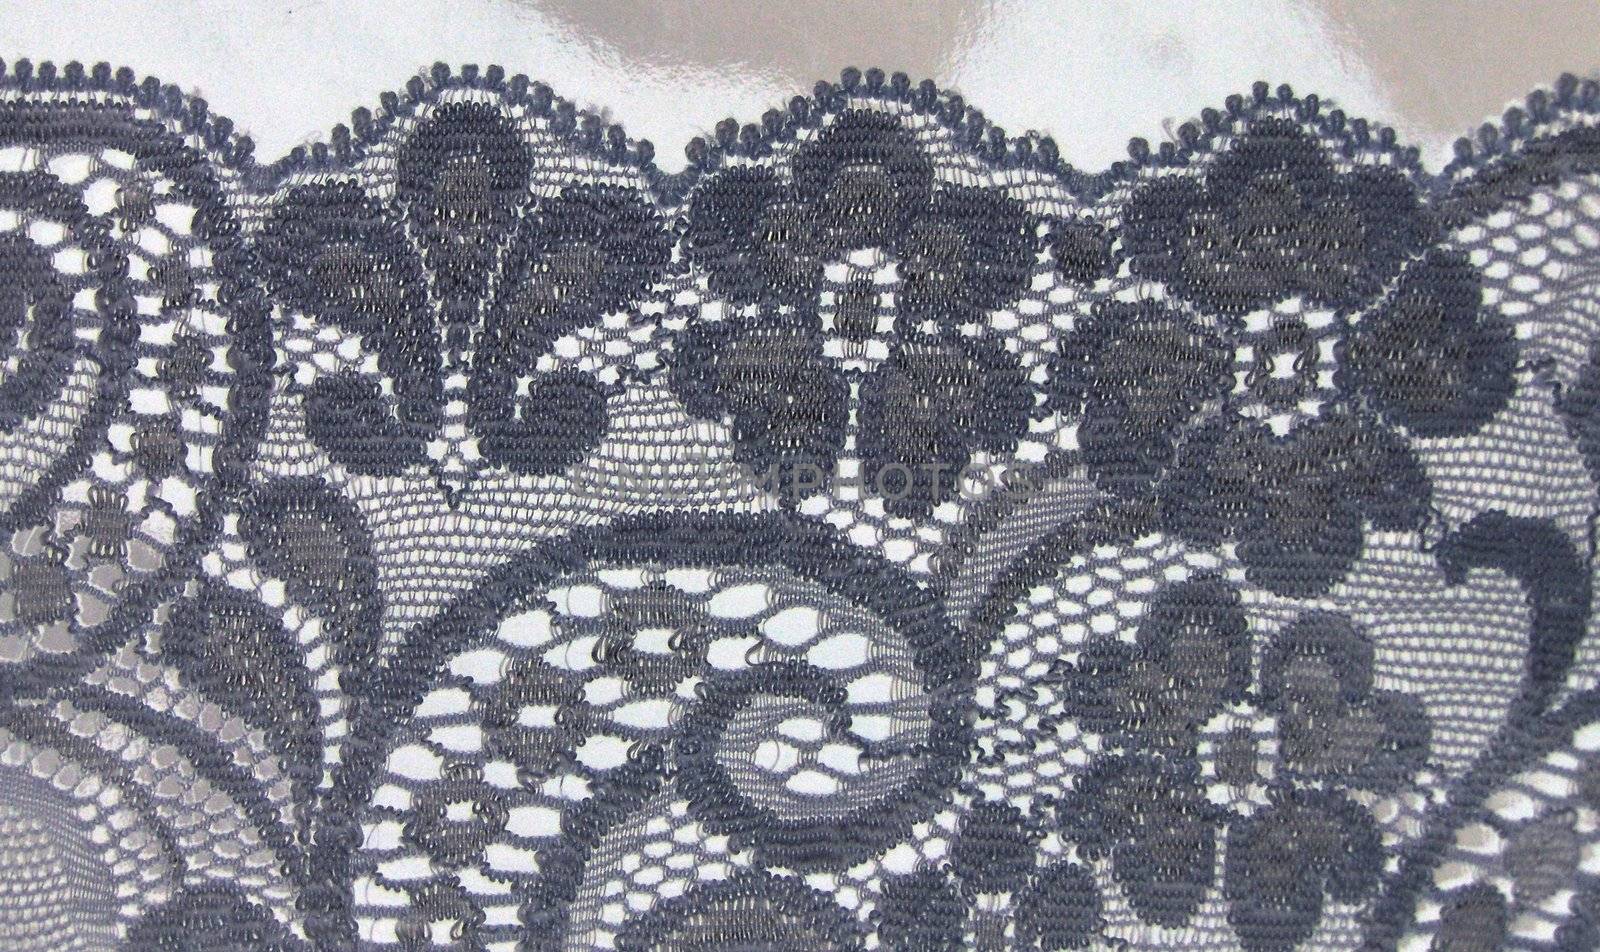 floral lace band suitable for stockings, robes, skirts